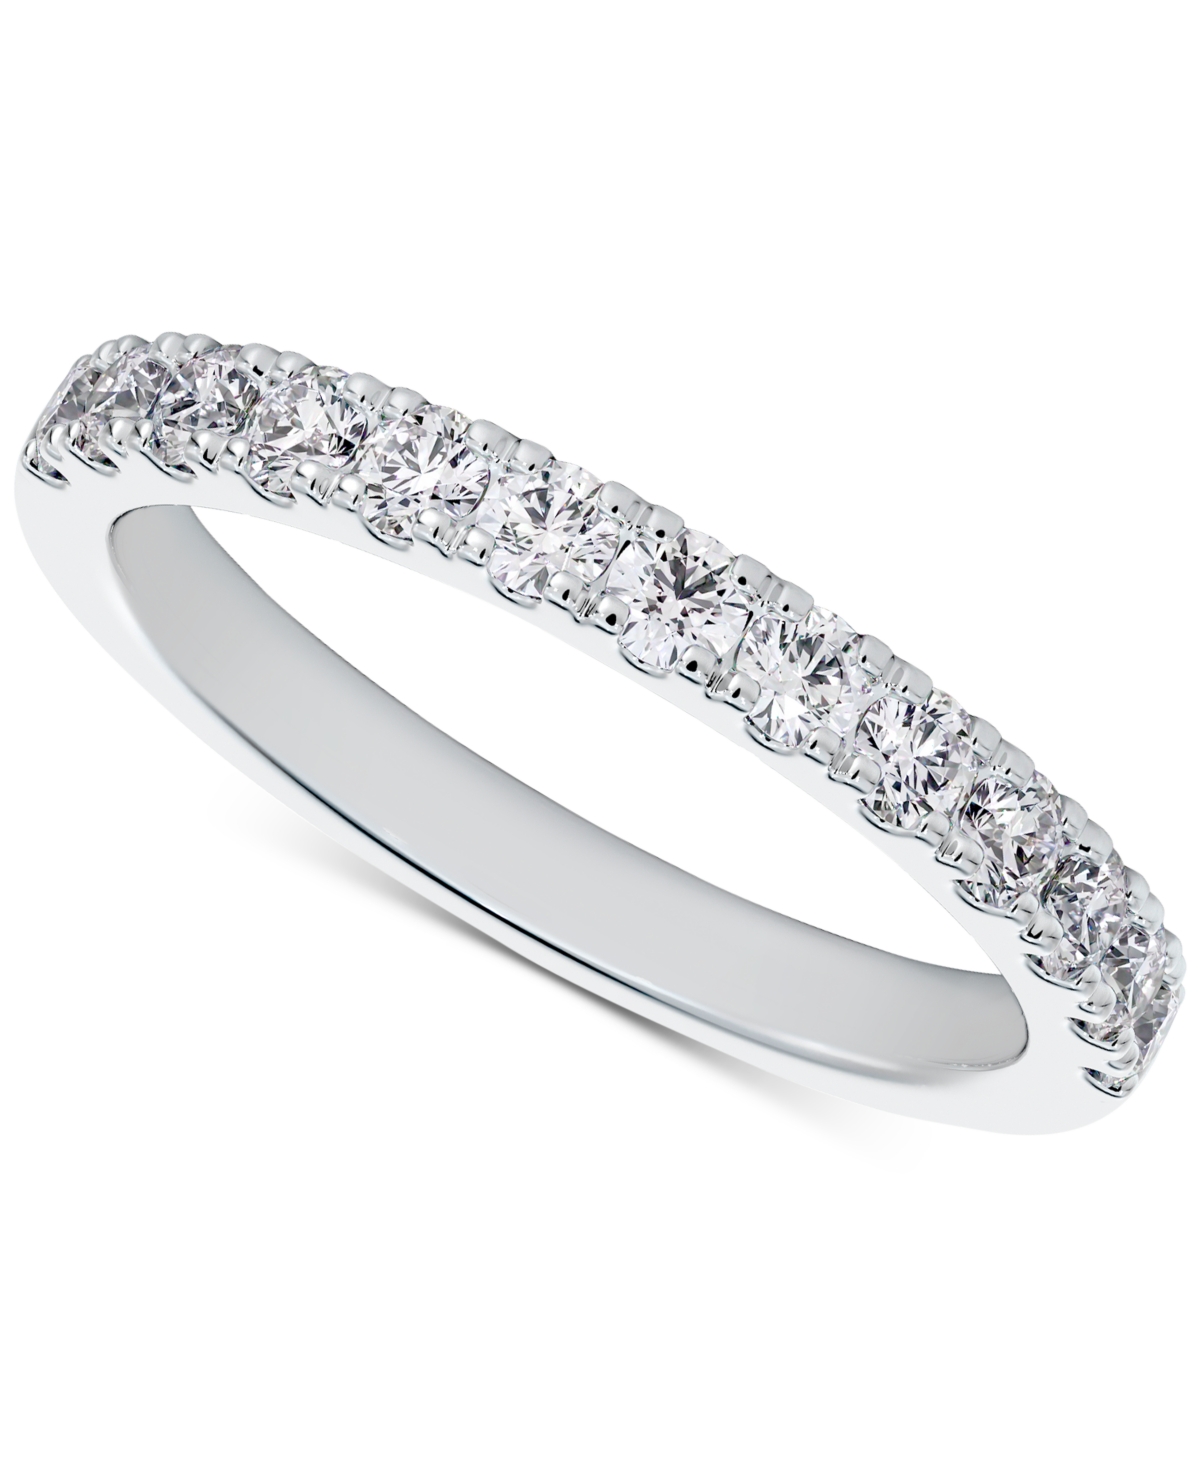 De Beers Forevermark Portfolio by De Beers Forevermark Diamond French Pave Wedding Band (1/2 ct. t.w.) in 14k White, Yellow or Rose Gold